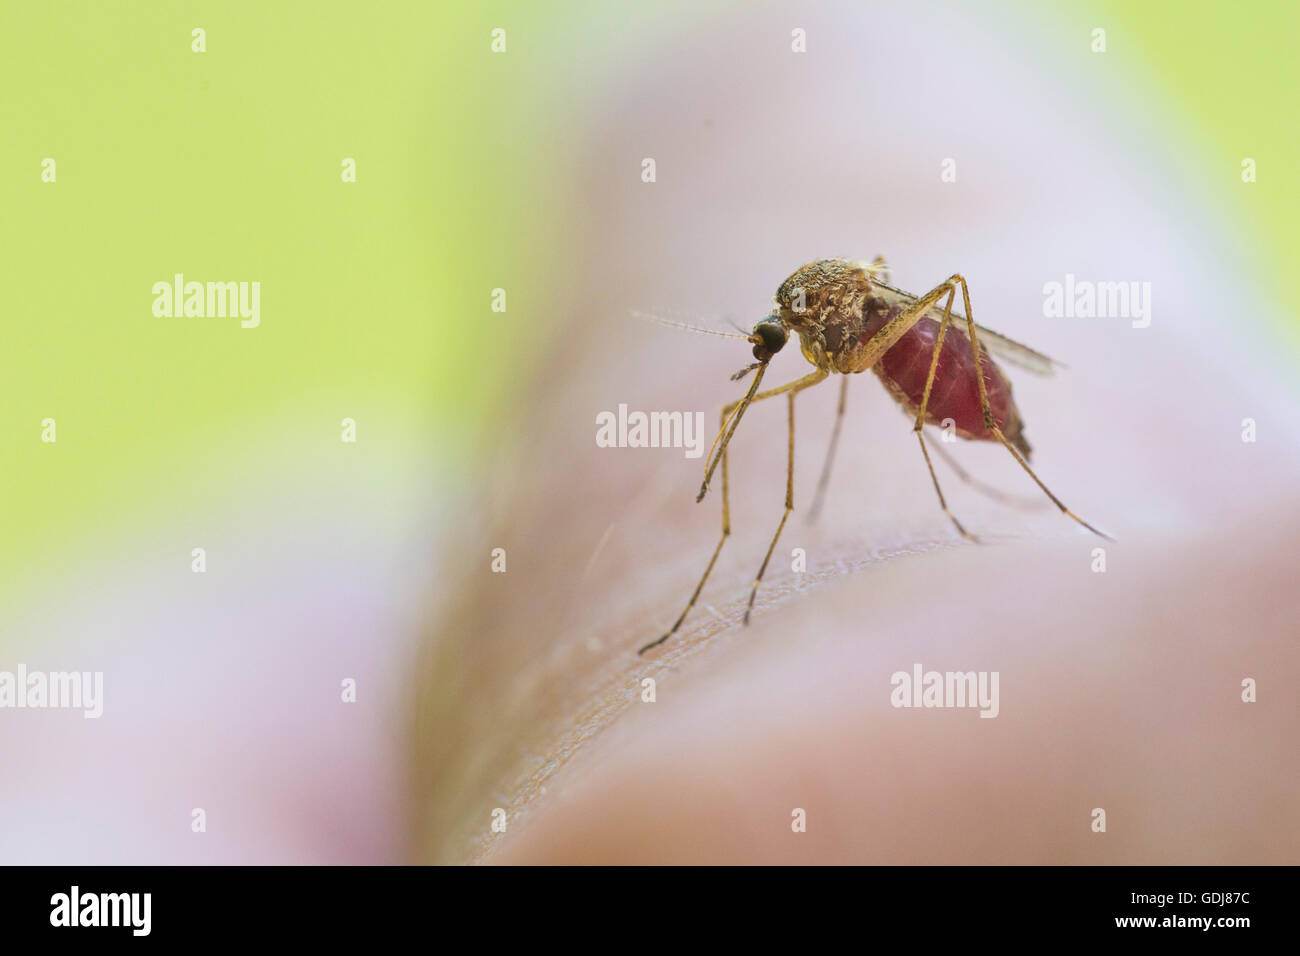 Feeding mosquito with human blood Stock Photo